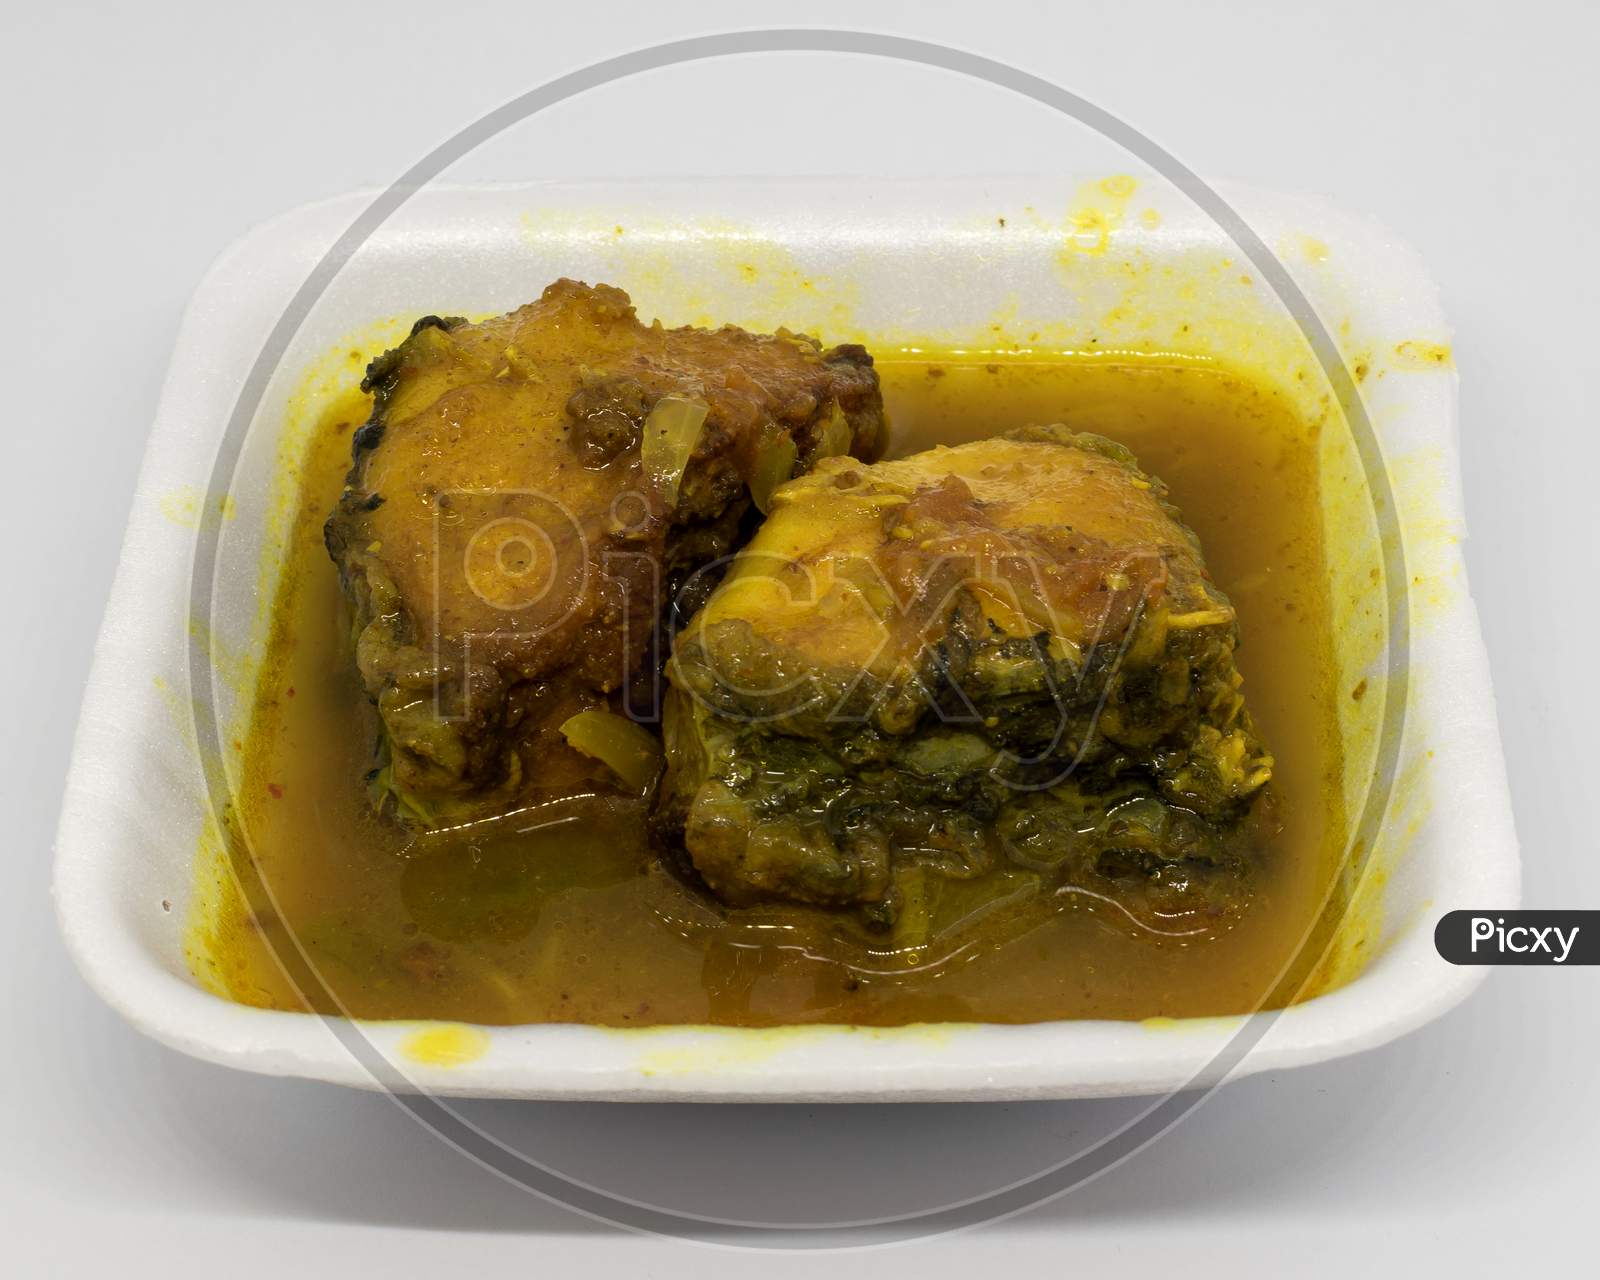 Bengali Food Catla Fish Curry Or Katla Macher Jhol Is A Famous Bengali Fish Curry Recipe From The State Of West Bengal, India